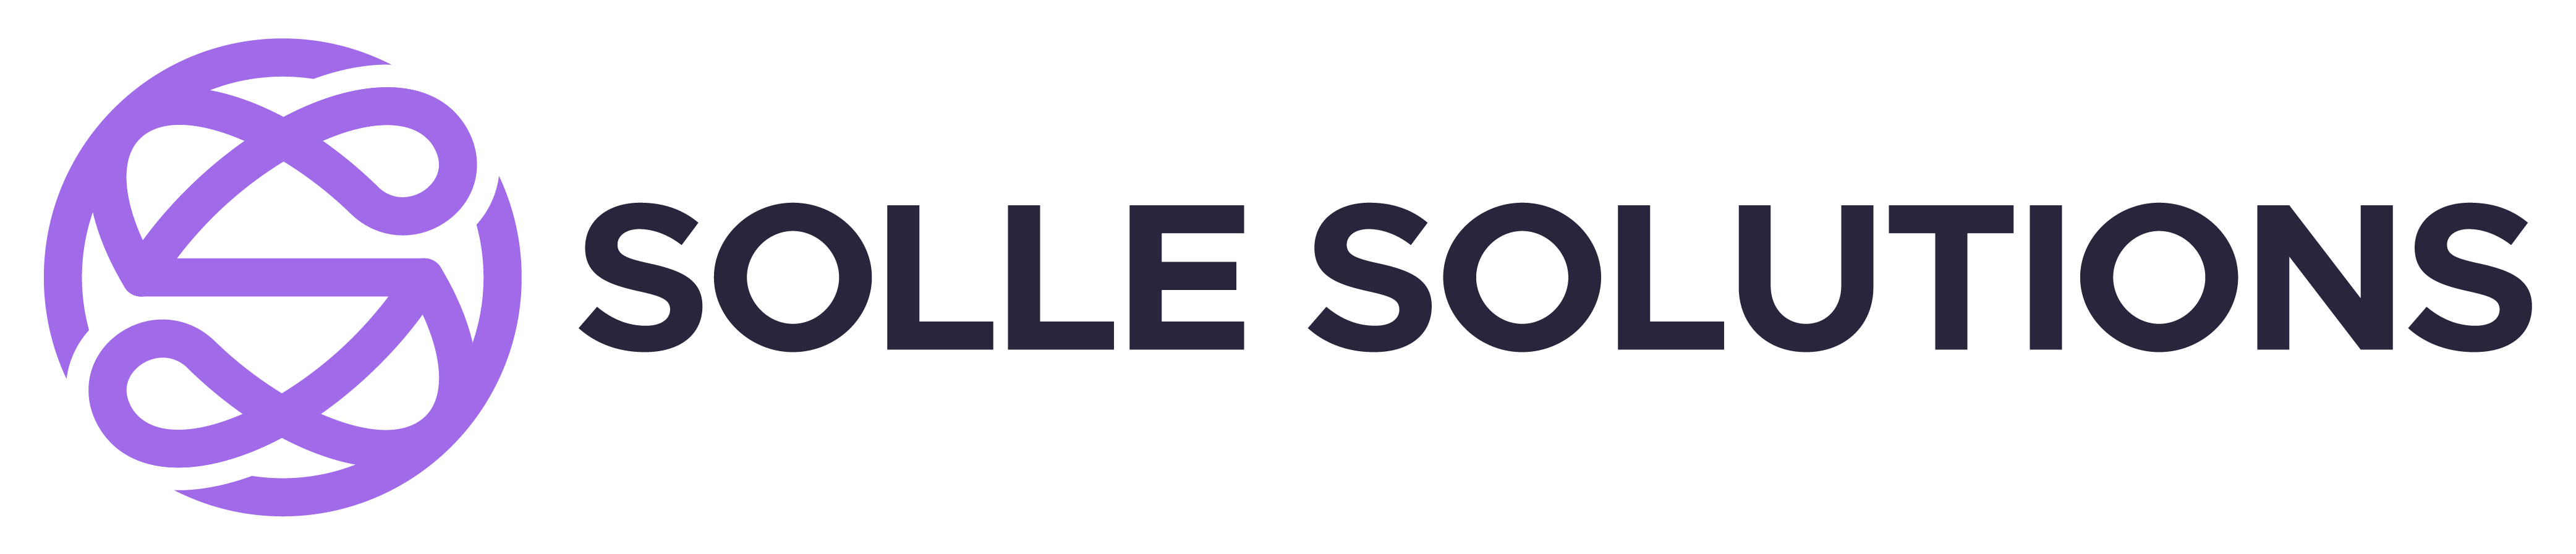 Solle Solutions logo